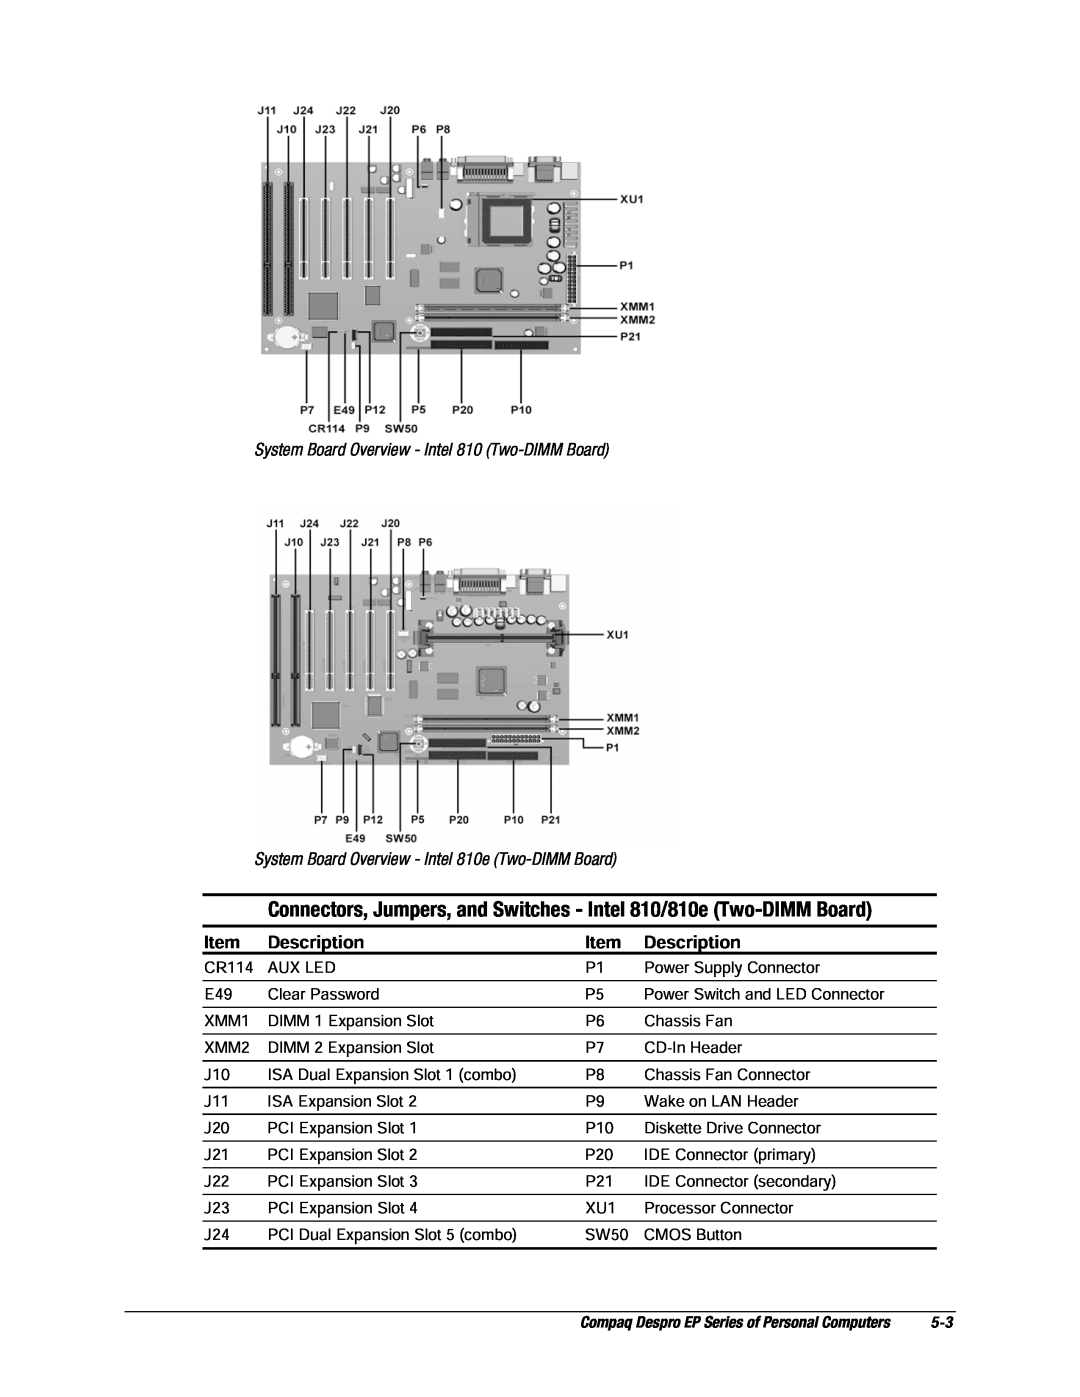 Compaq EP Series manual Connectors, Jumpers, and Switches - Intel 810/810e Two-DIMM Board, Description 